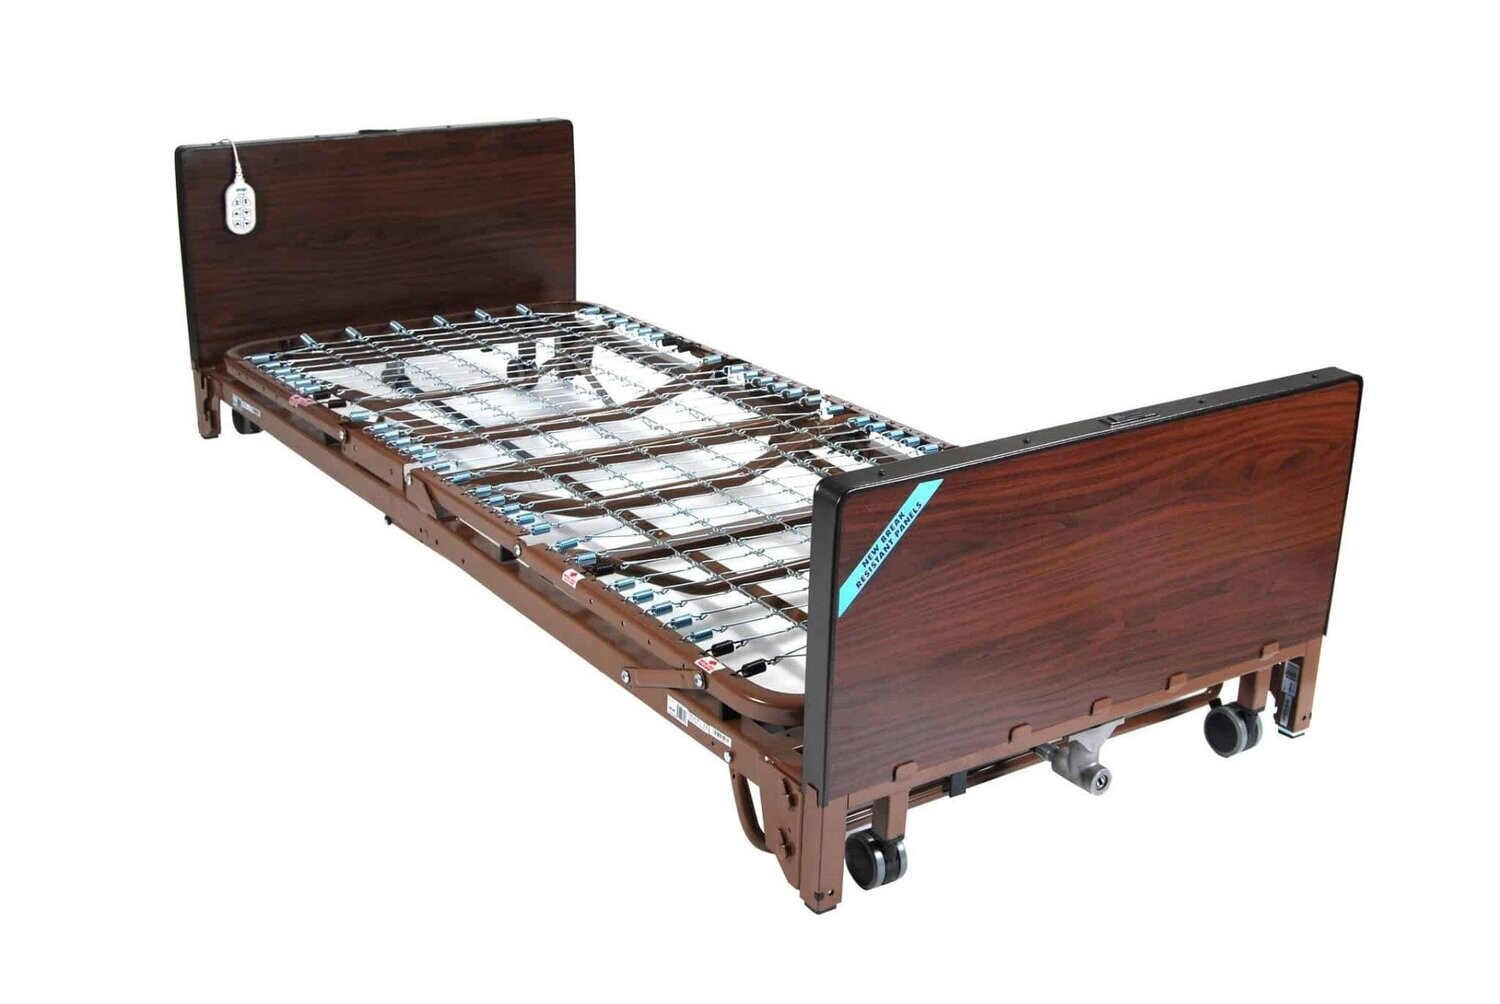 Drive Full Electric Low Height Bed